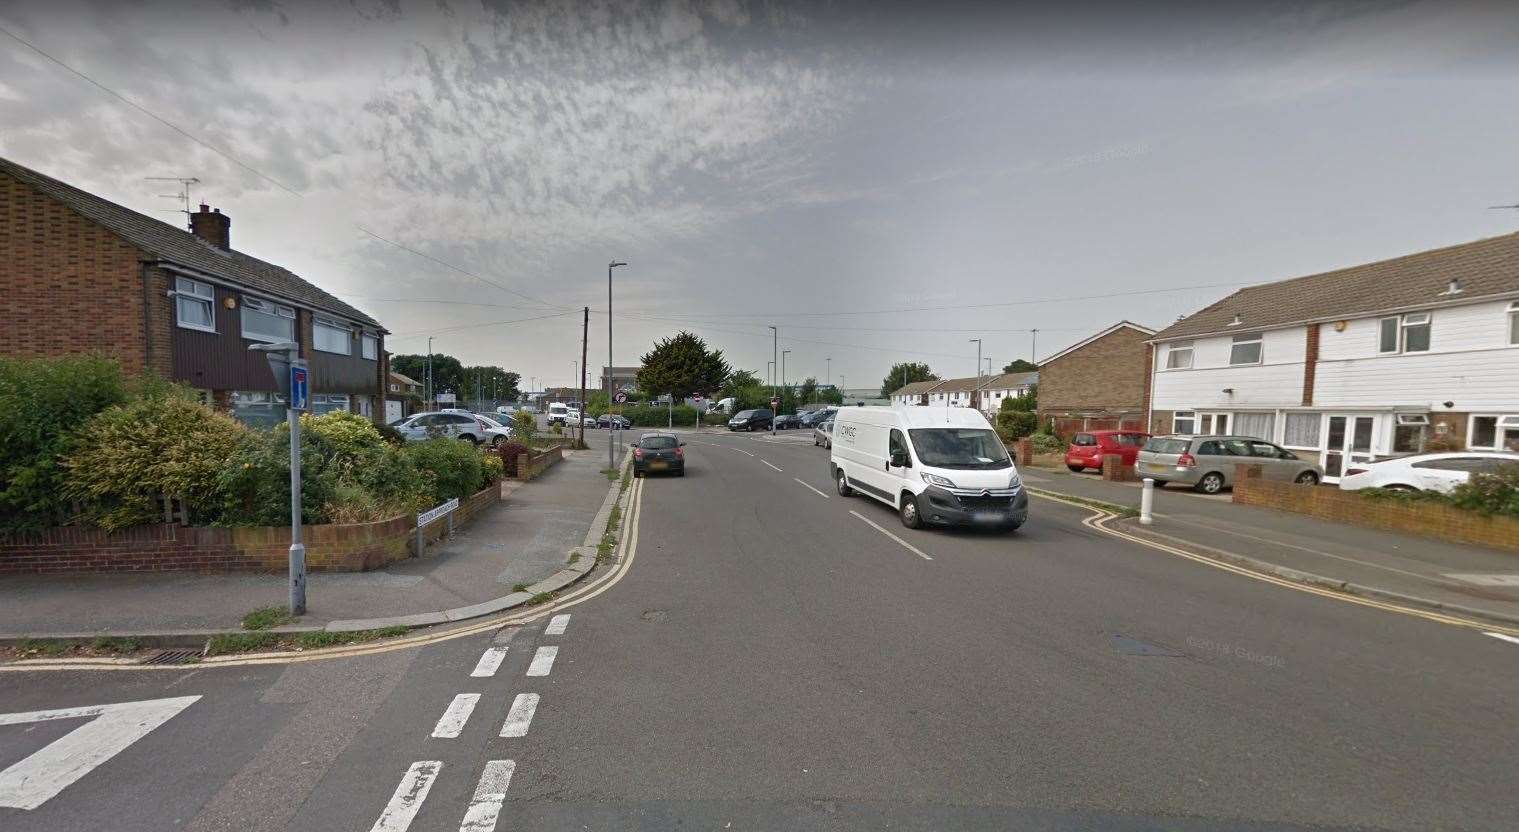 The incident took place in Station Approach Road, Ramsgate, earlier this month. Picture: Google